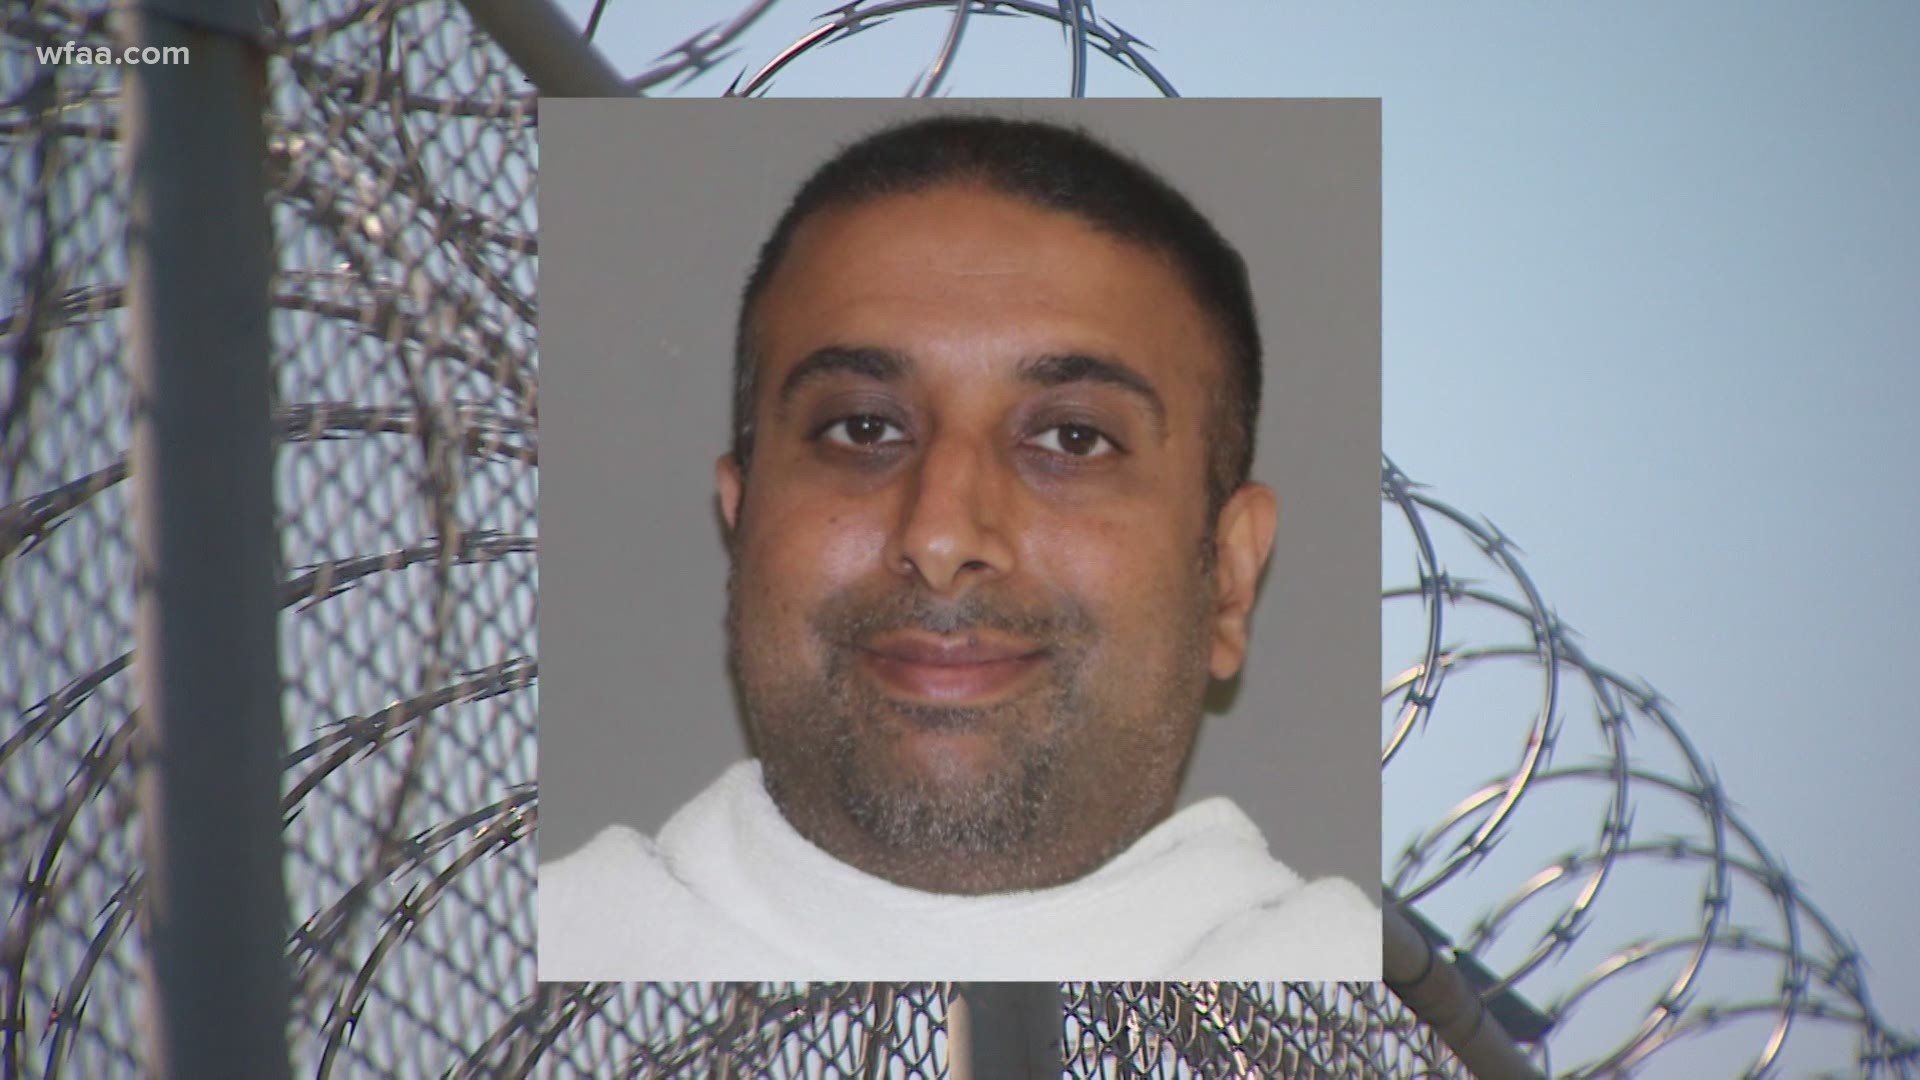 Mohamed allegedly sent 84 applications for mail-in ballots, which were later found at his residence, investigators said.